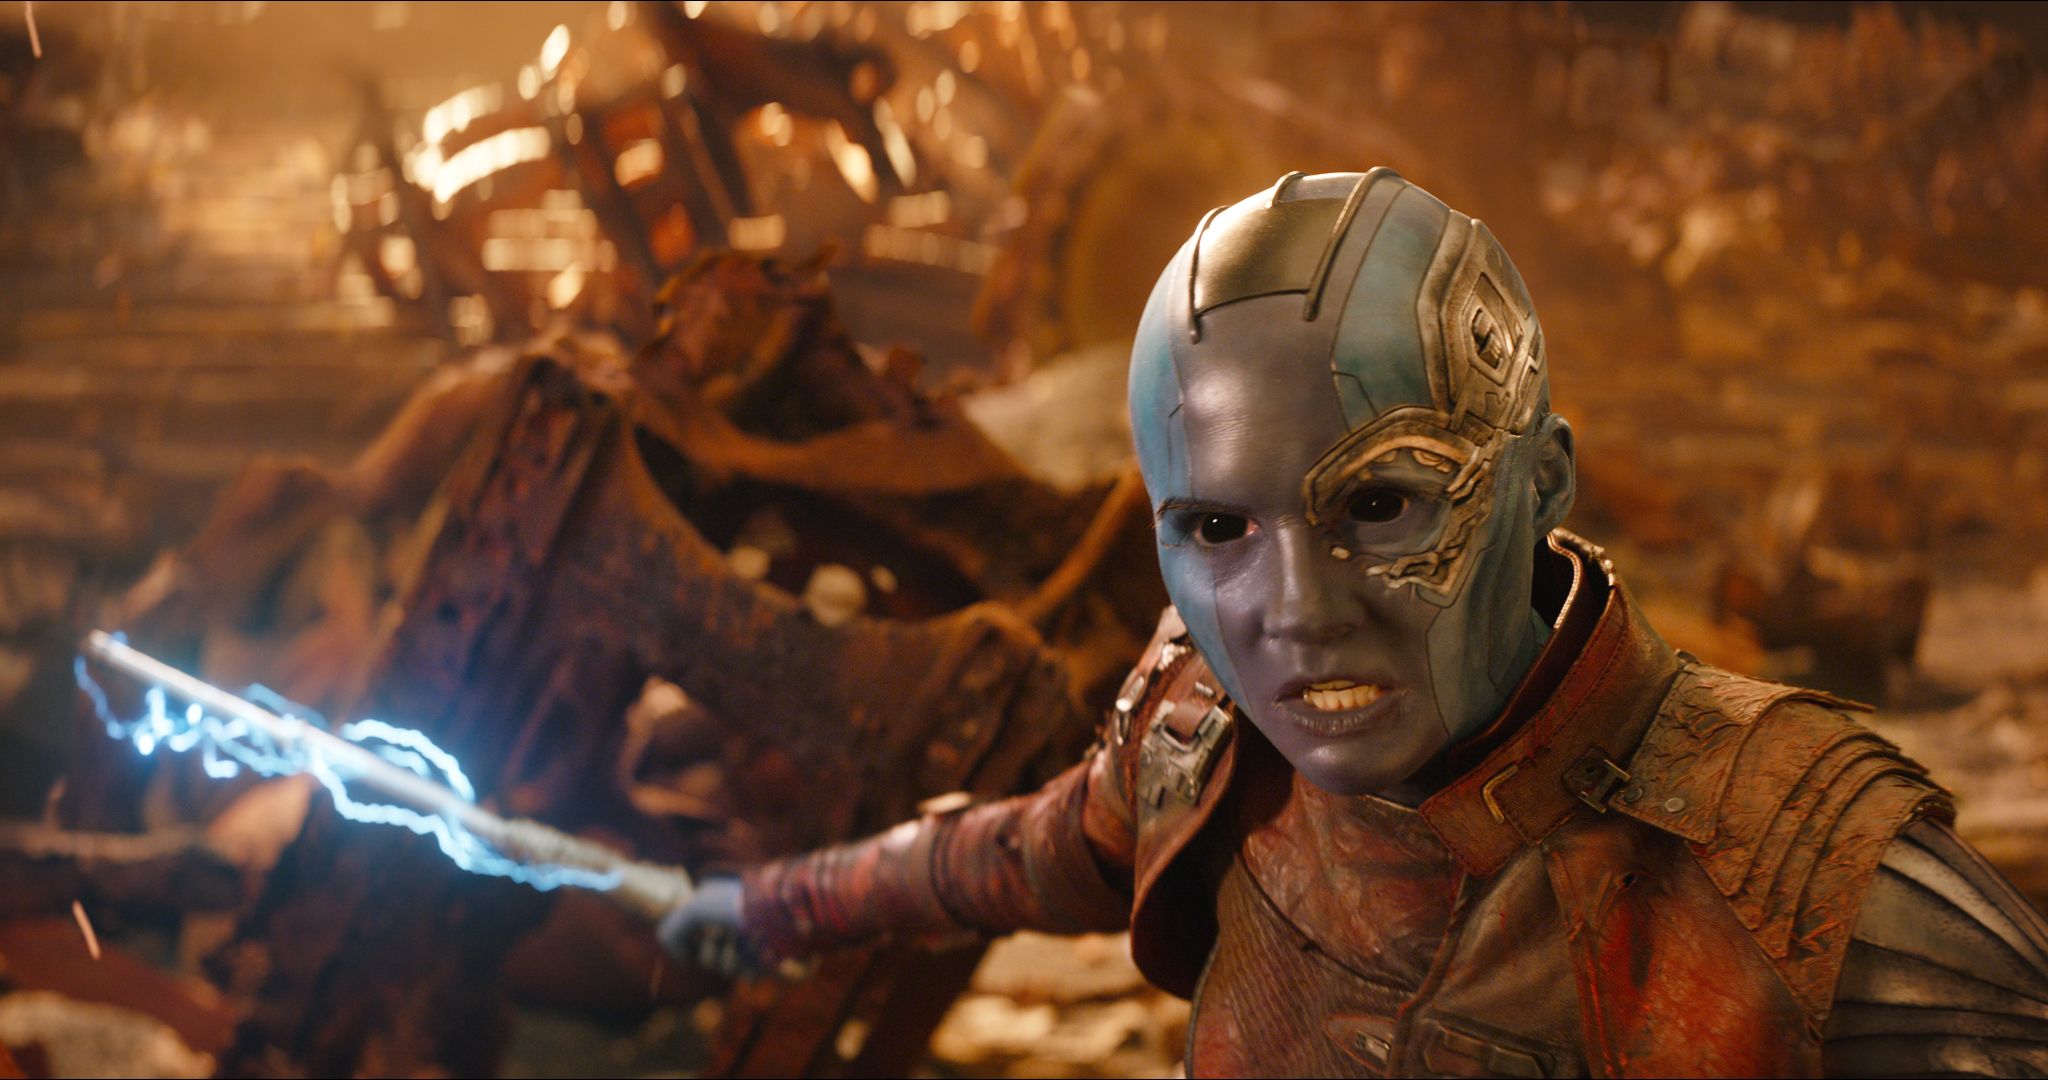 Marvel Cinematic Universe Villains Ranked From Worst to Best